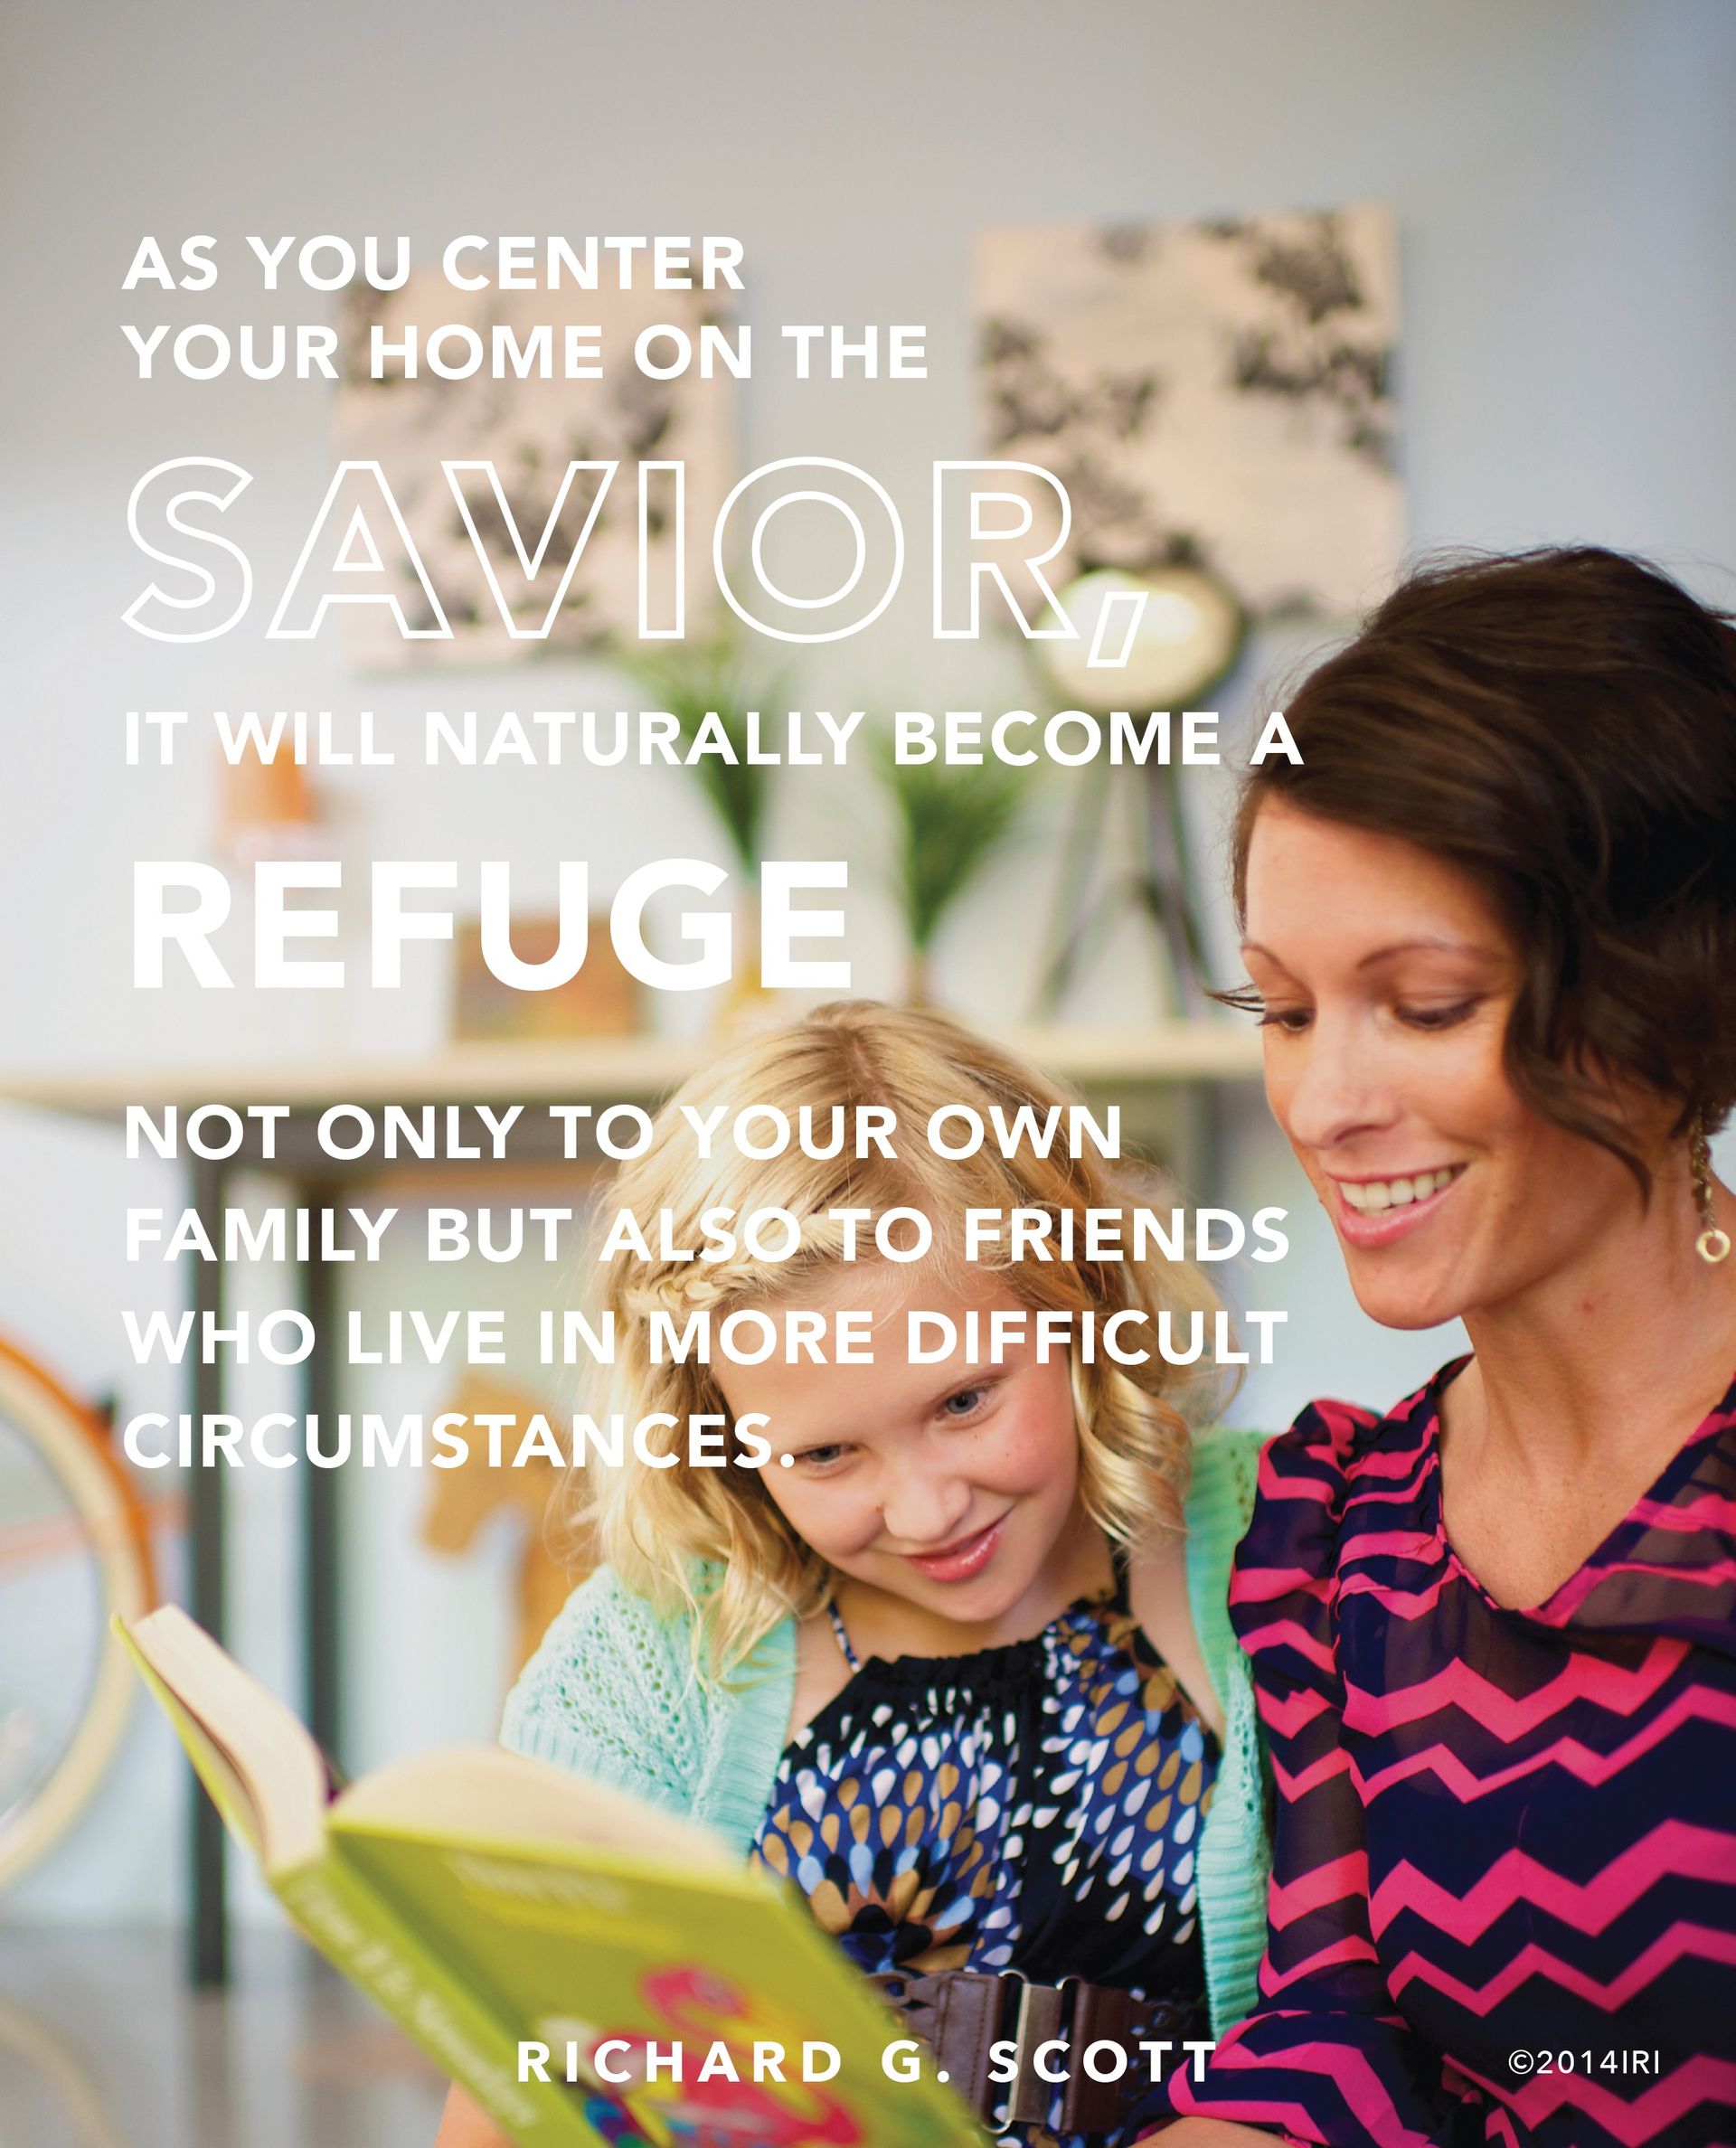 “As you center your home on the Savior, it will naturally become a refuge not only to your own family but also to friends who live in more difficult circumstances.”—Elder Richard G. Scott, “For Peace at Home”